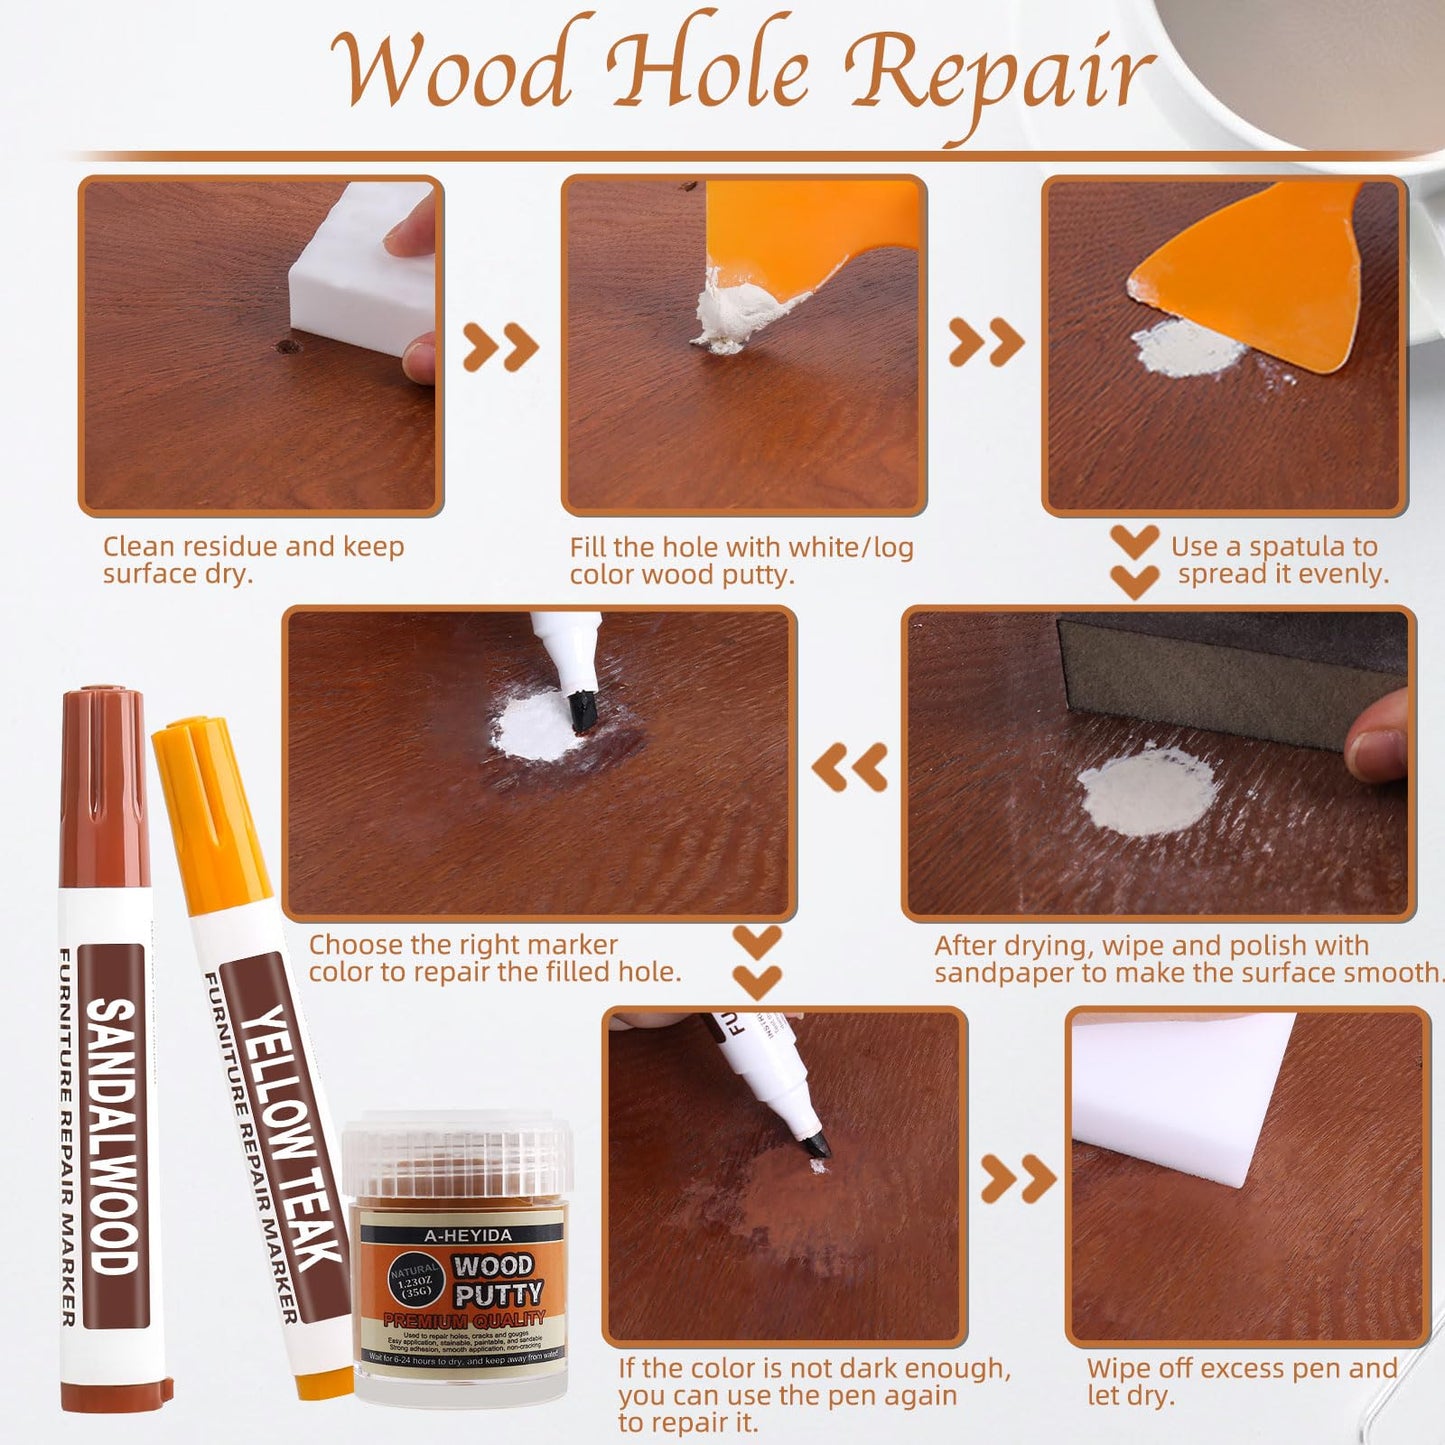 Furniture Touch Up Markers - 12 Color Wood Repair Kit Wood Marker Pens with Wood Putty Filler and Beeswax, Hardwood Floor Furniture Scratch Repair